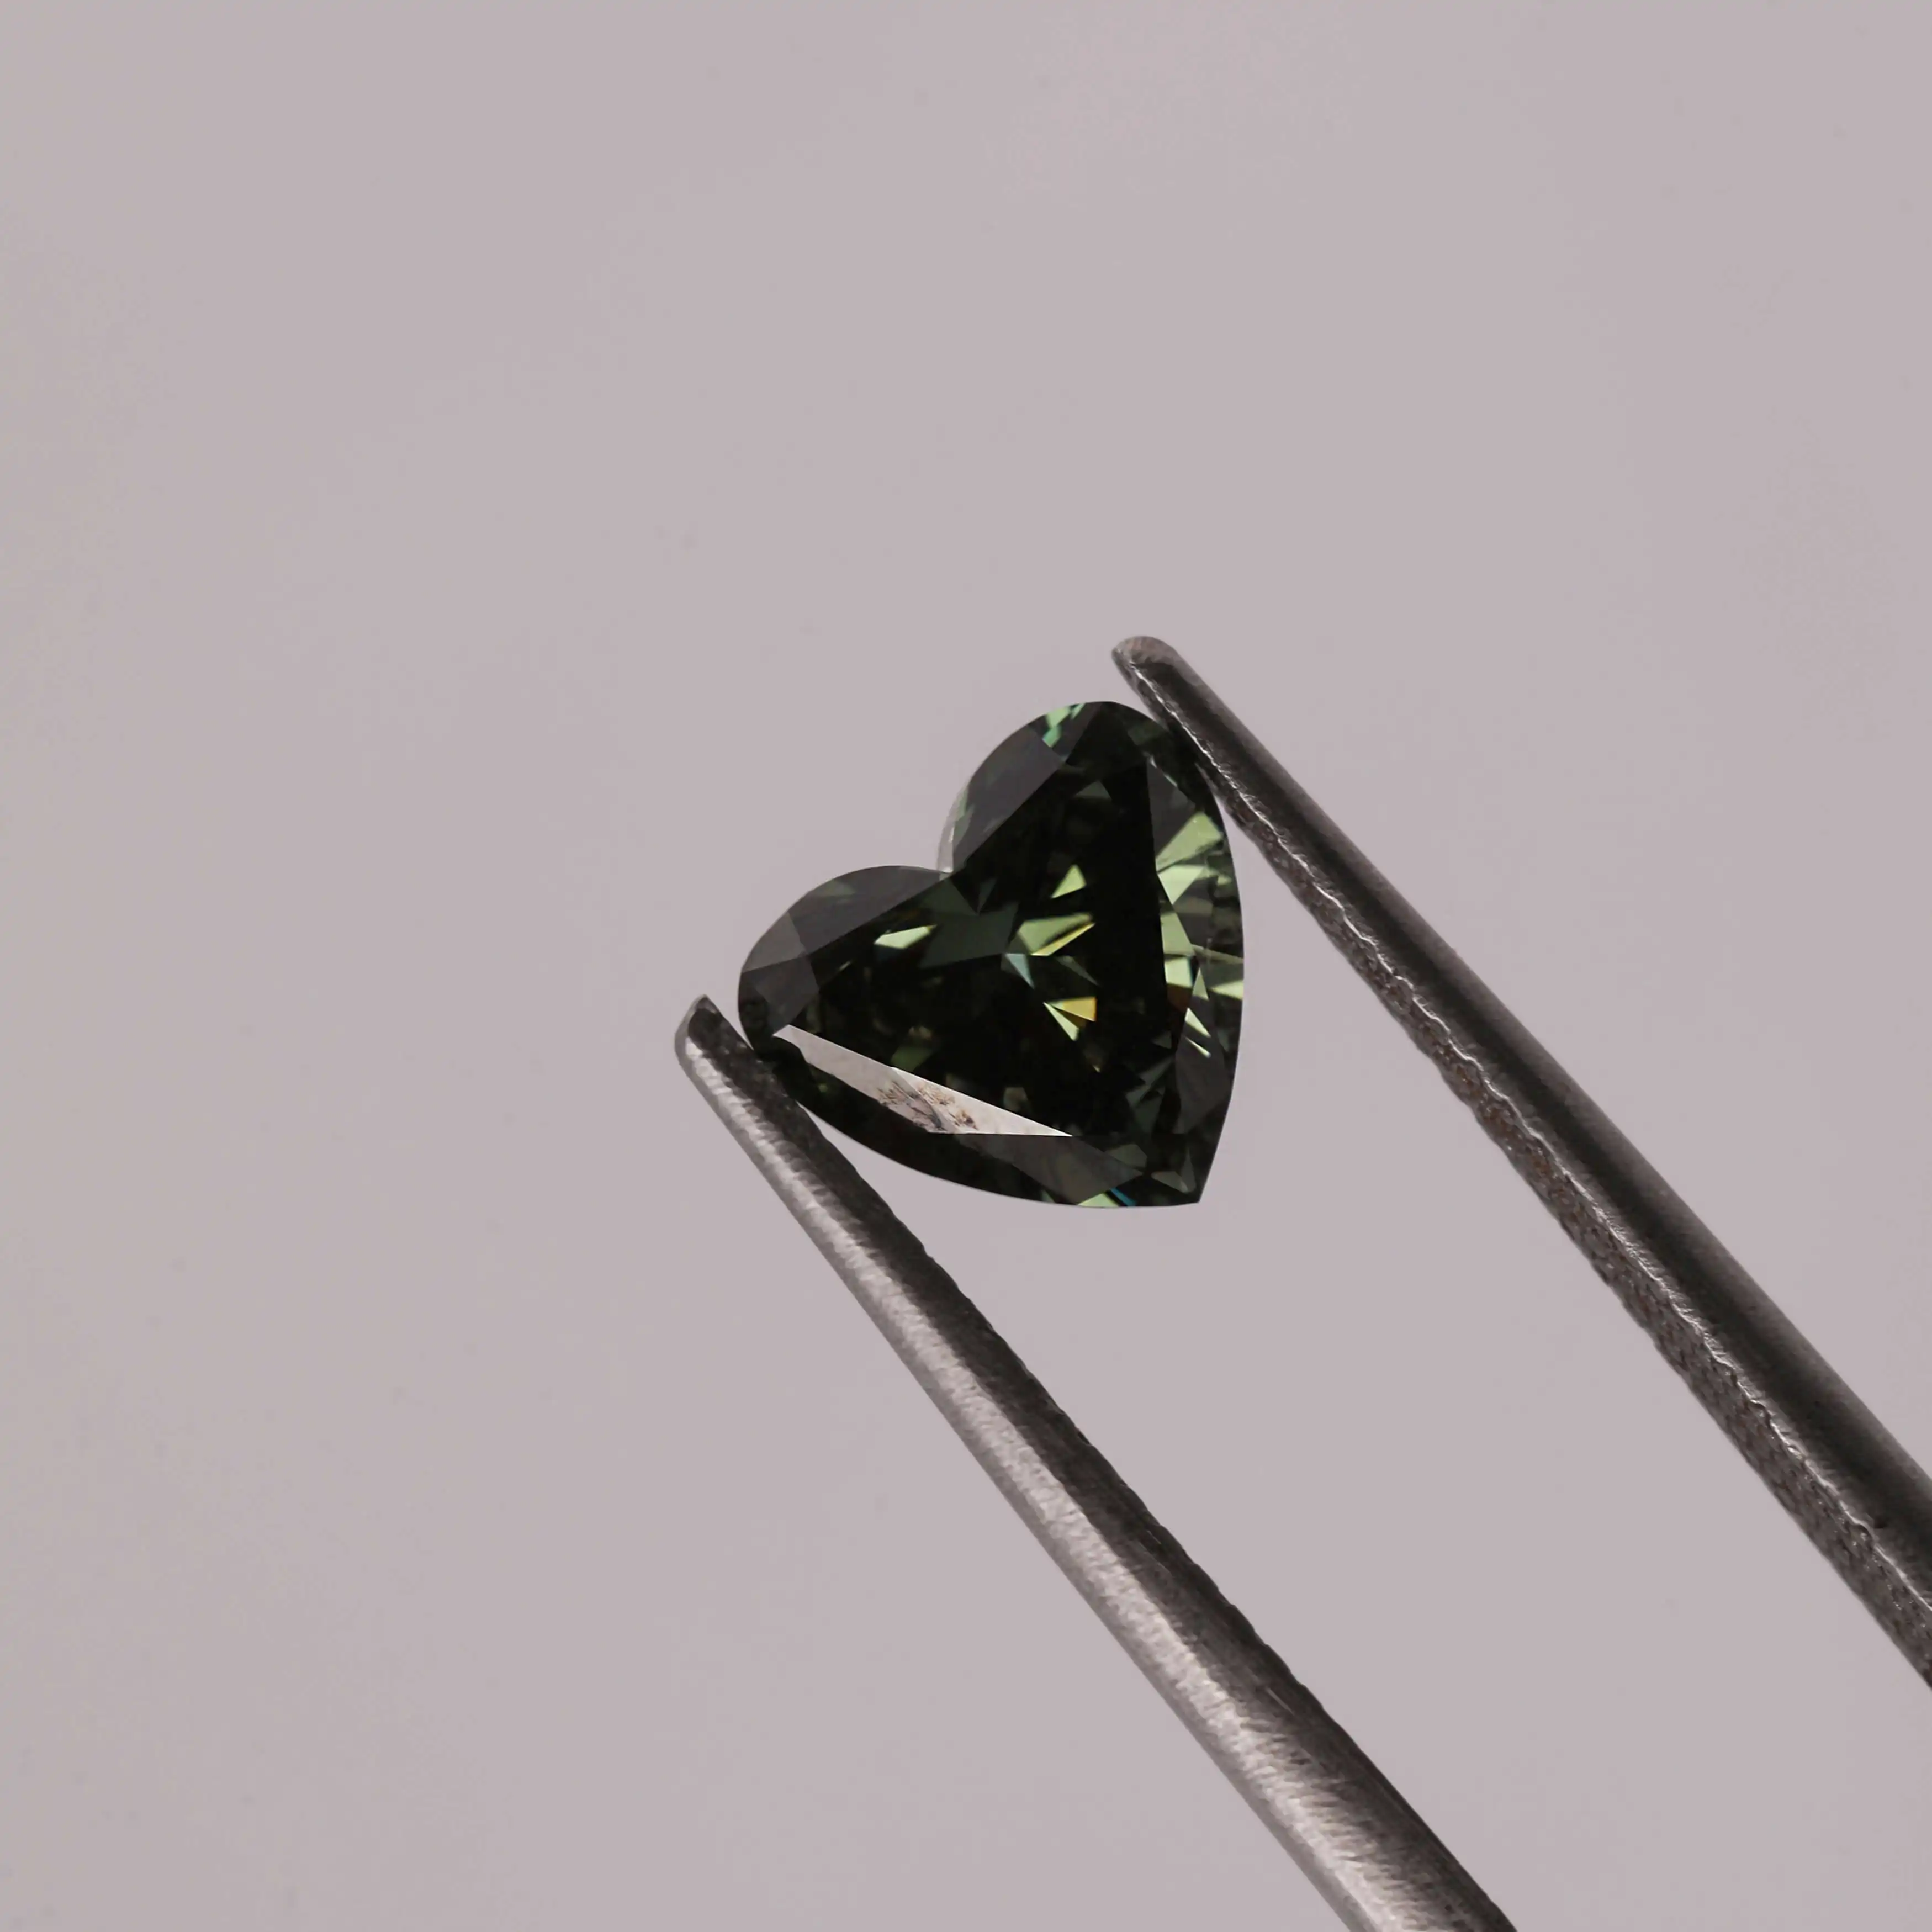 1.32 CT Heart Cut Green CVD Lab Diamond for Jewelry Conflict Free Diamond for Custom Engagement Ring